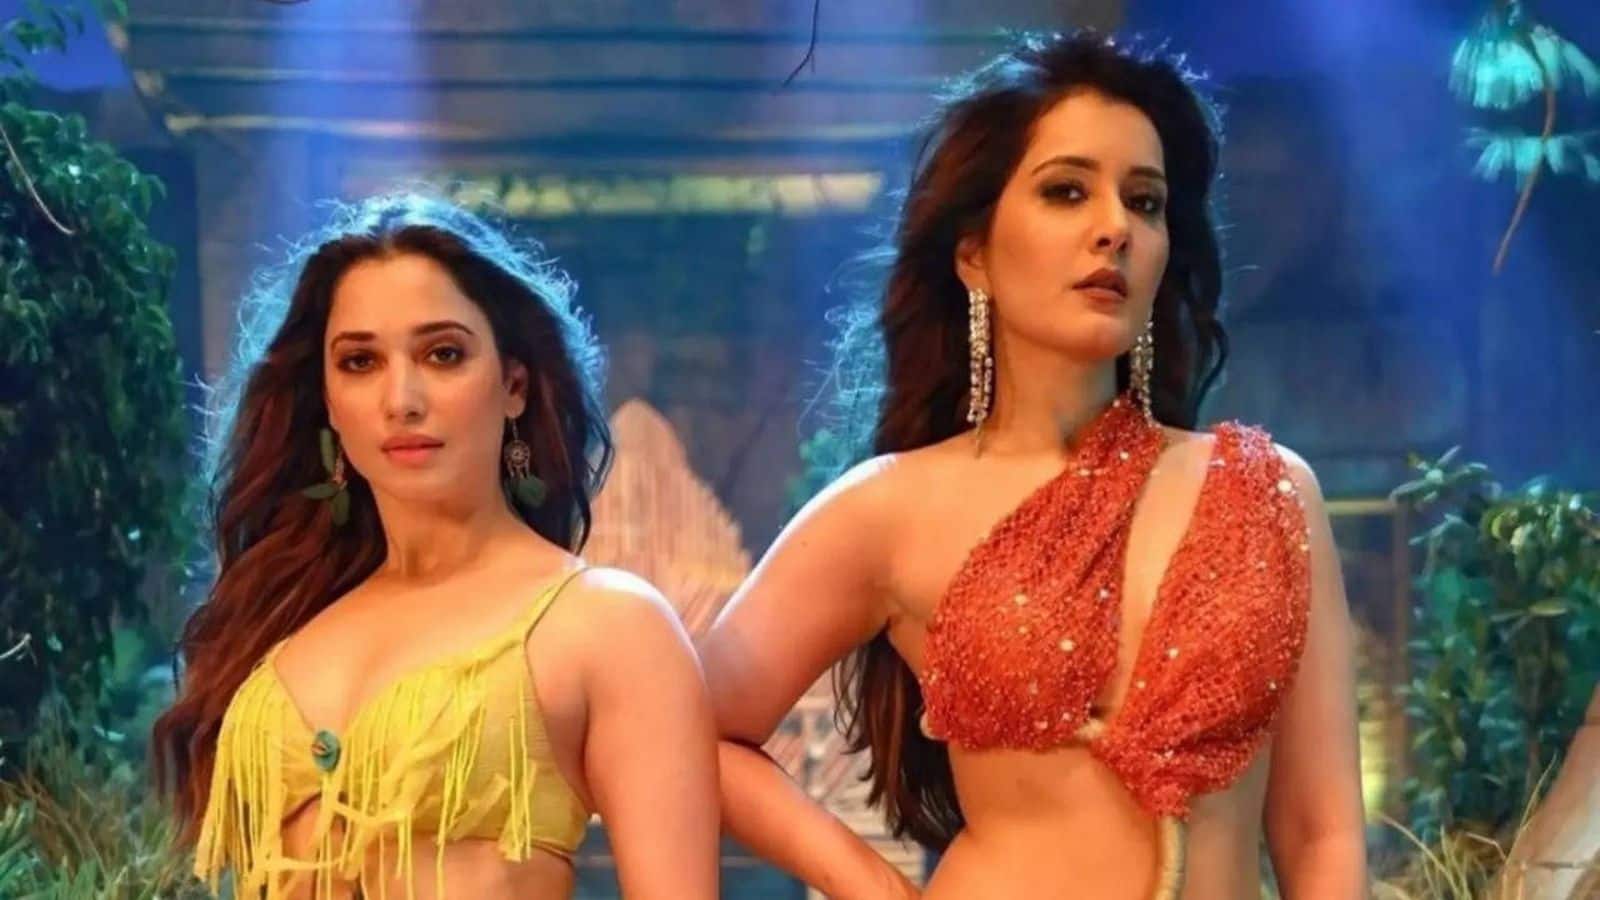 Box office: 'Aranmanai 4' mints over ₹18cr on opening weekend